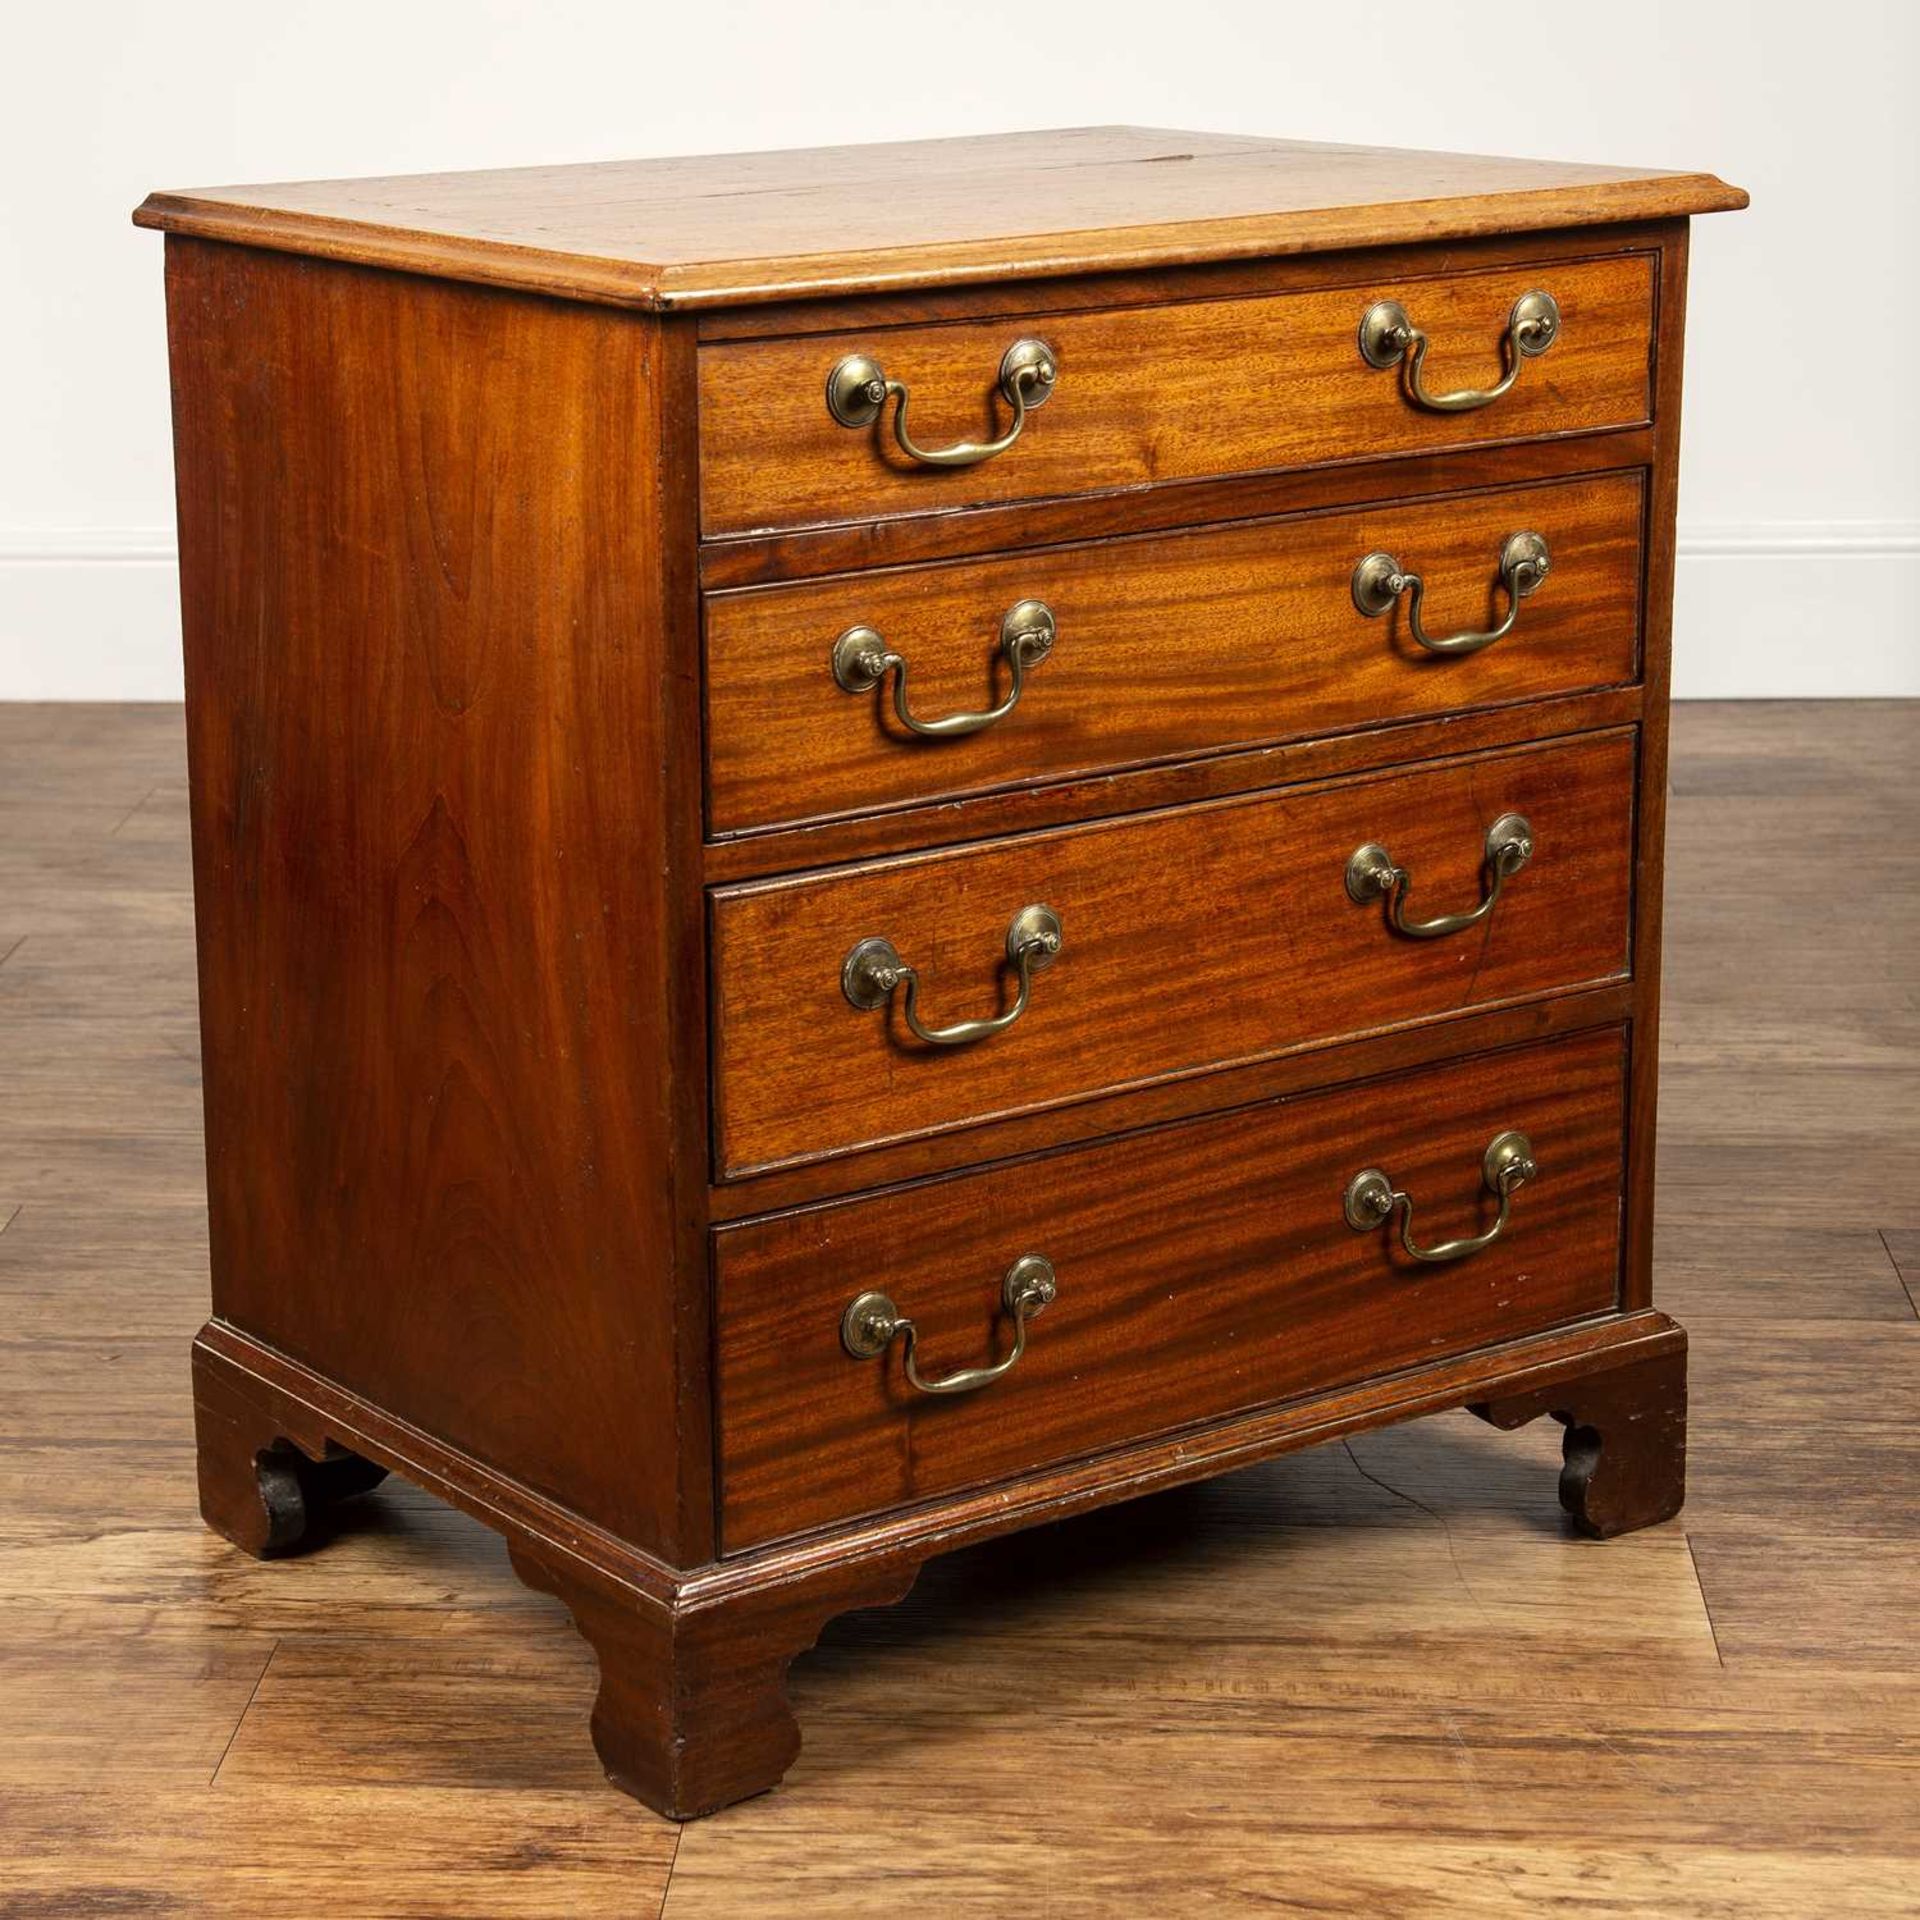 Mahogany chest of drawers 19th Century, six graduated drawers with brass handles, standing on - Image 2 of 6